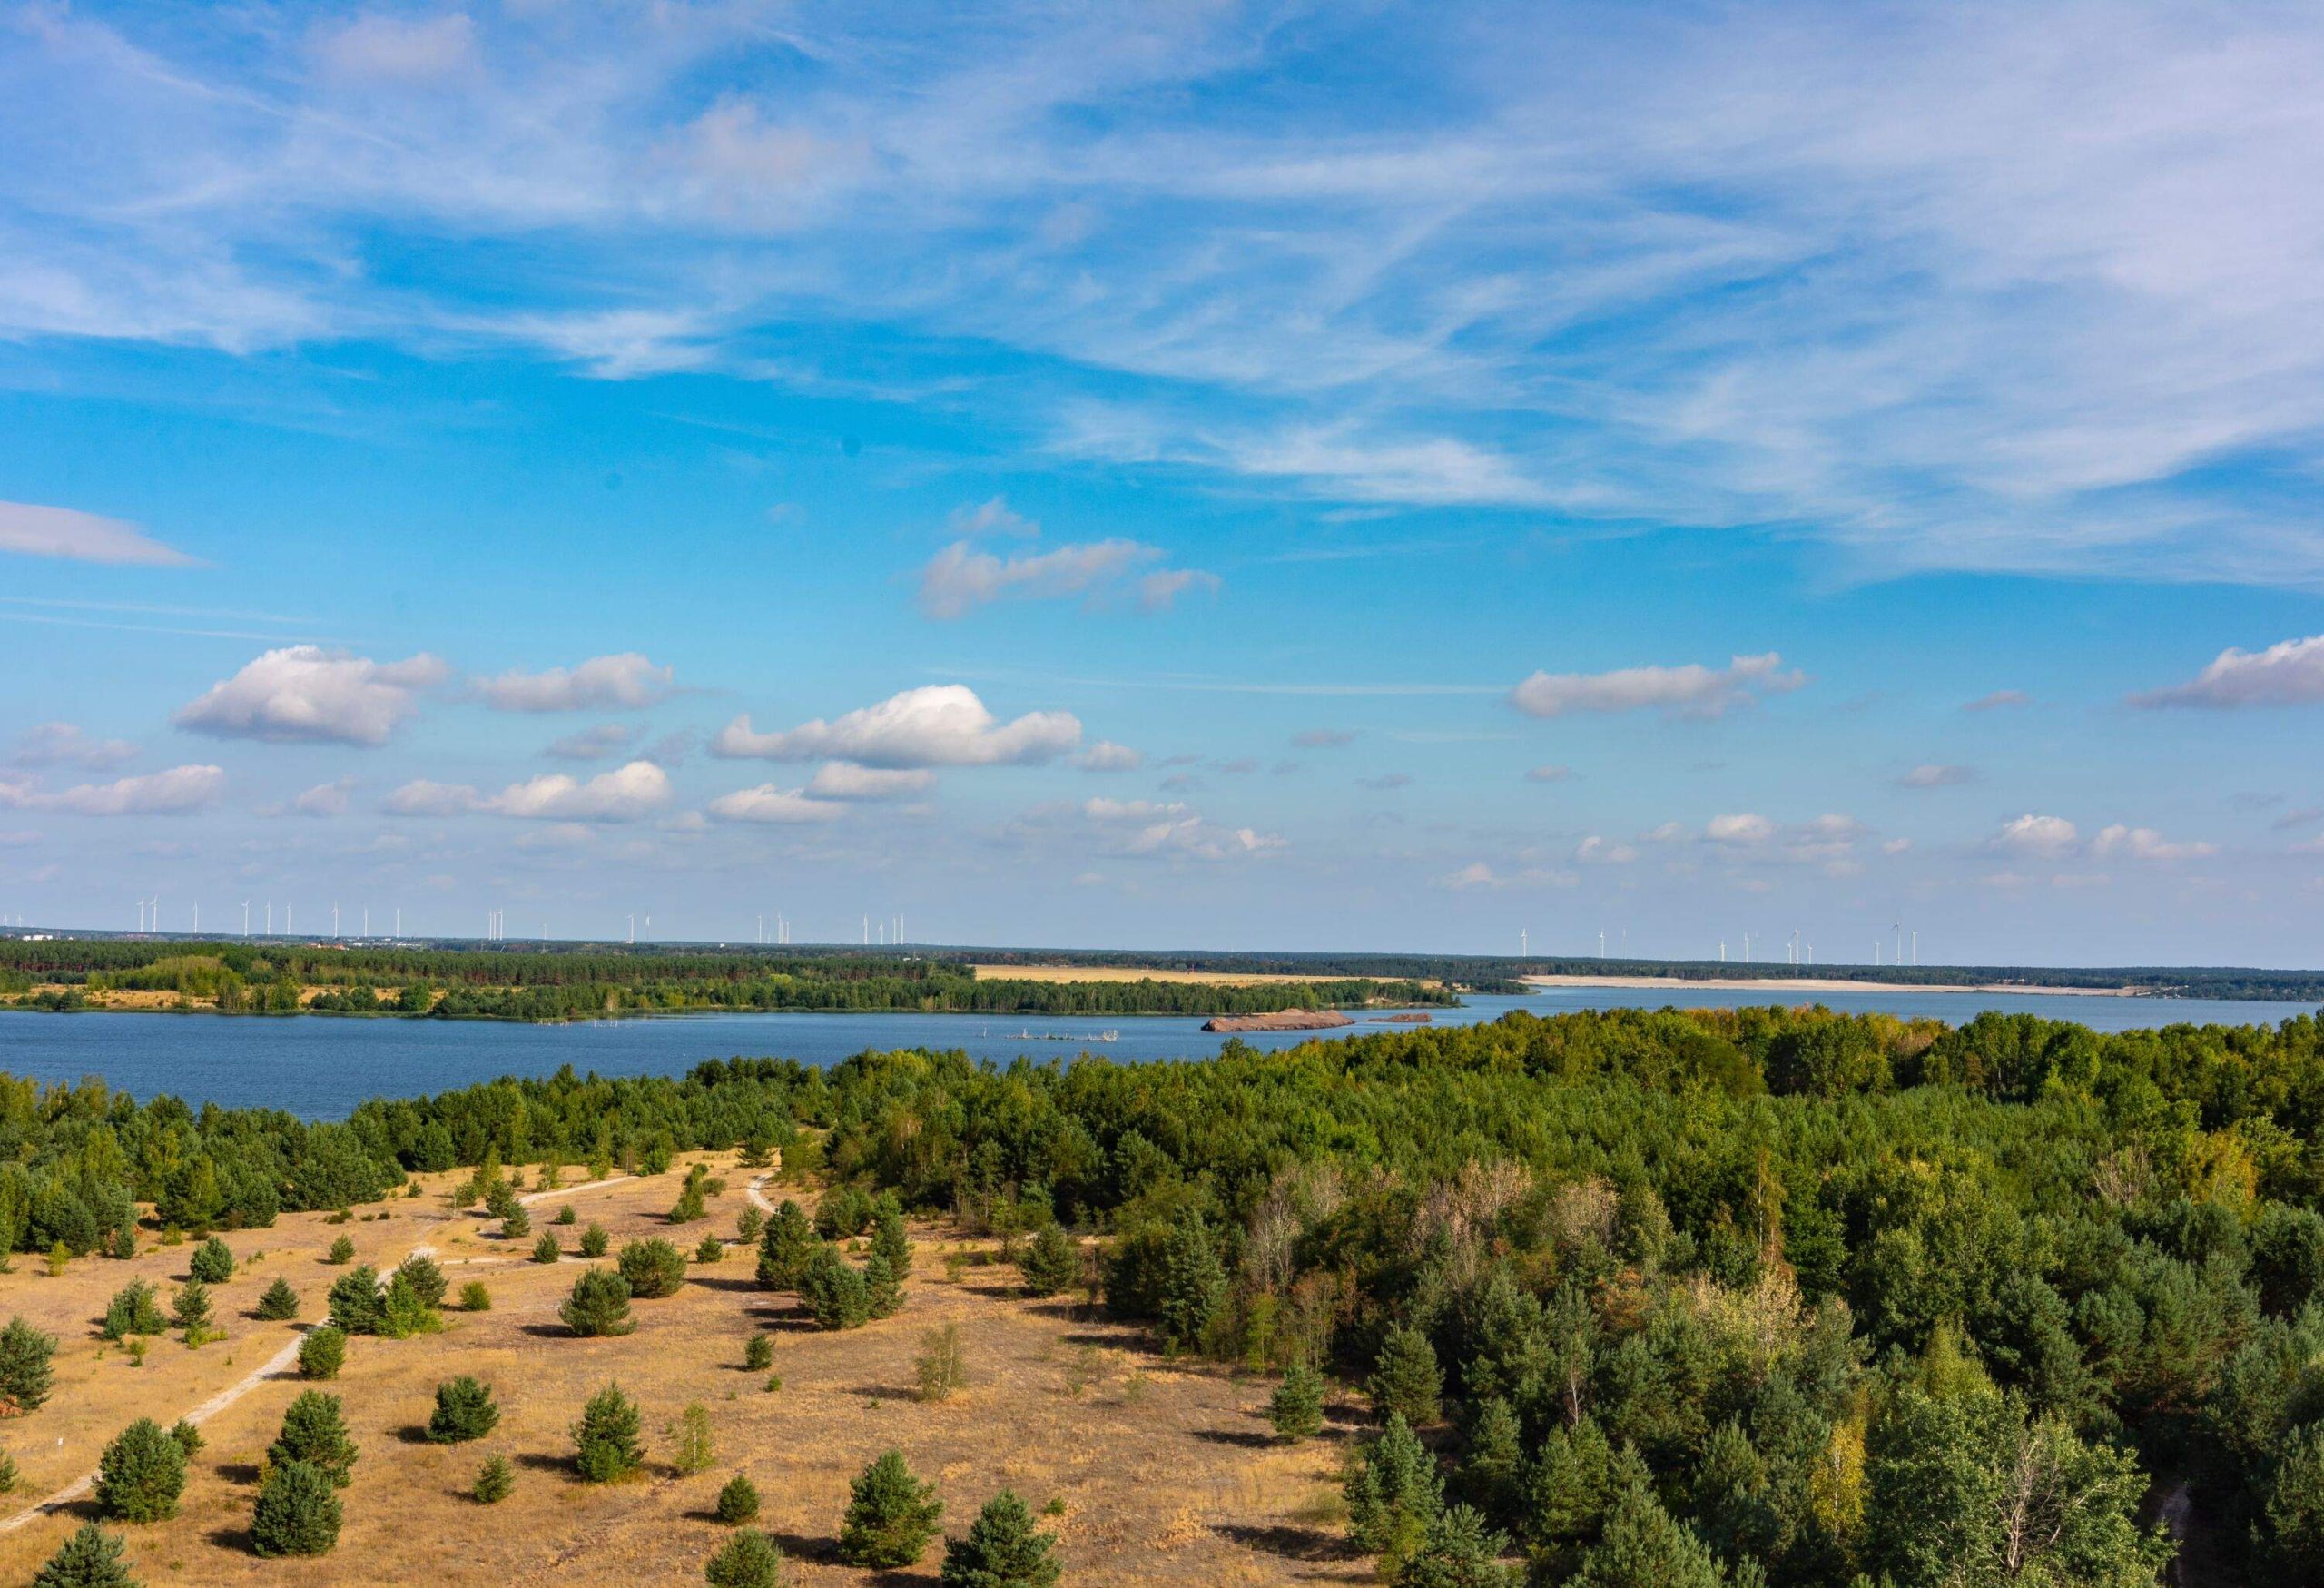 The Lusatian Lake District is an artificial lake area of the former lignite mining area of Lusatia that connects several lakes through canals. The so-called 